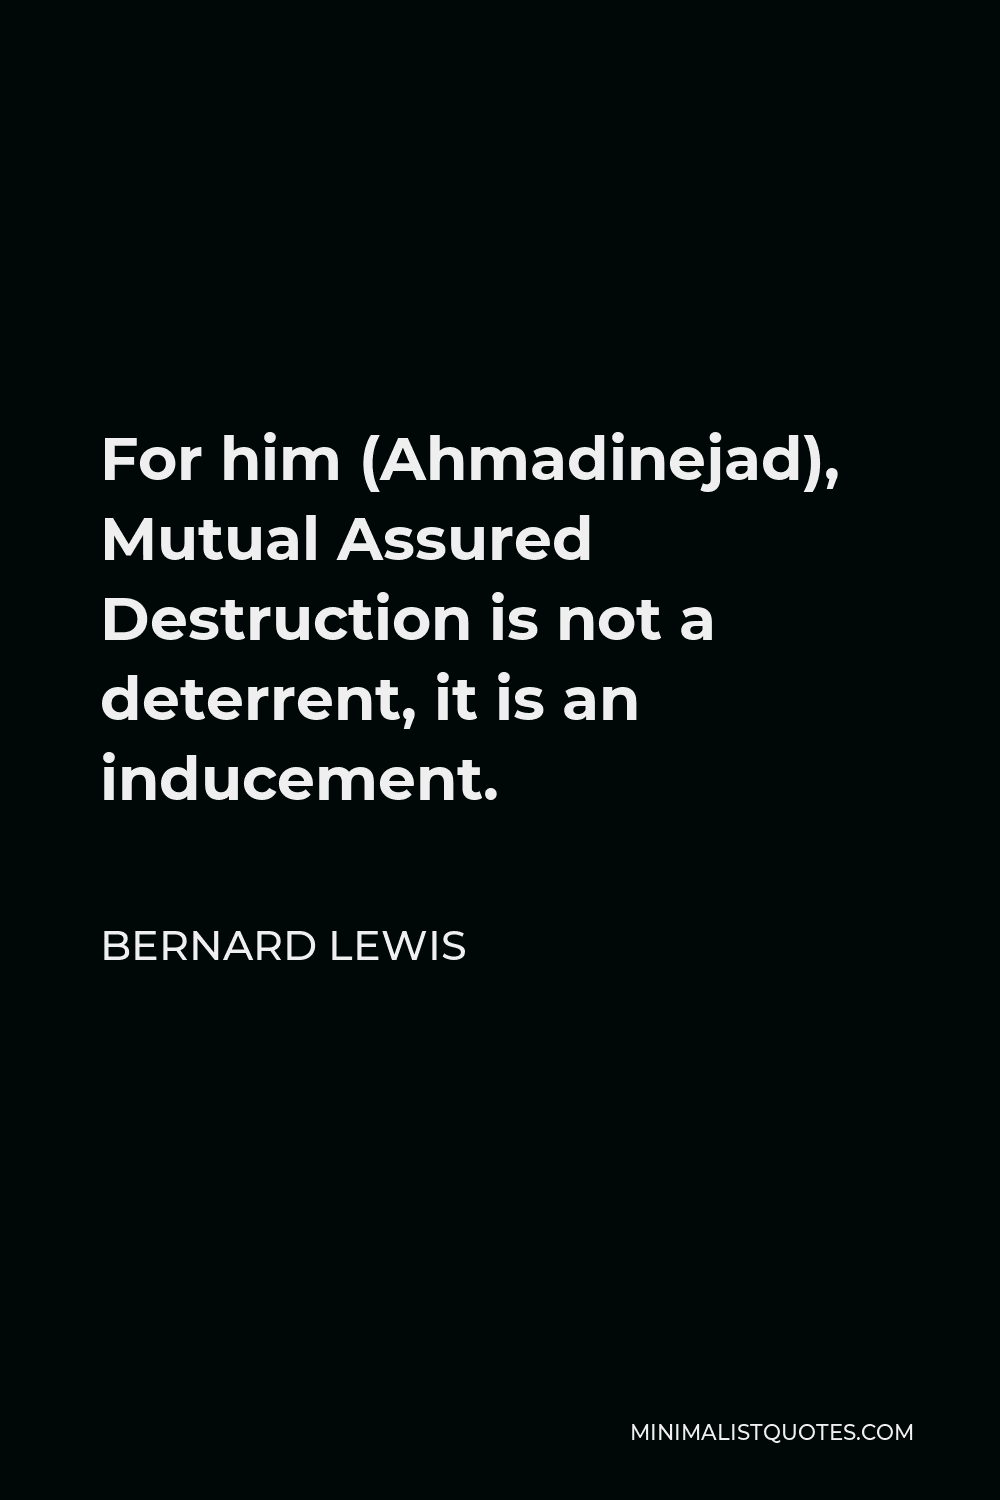 Bernard Lewis Quote - For him (Ahmadinejad), Mutual Assured Destruction is not a deterrent, it is an inducement.